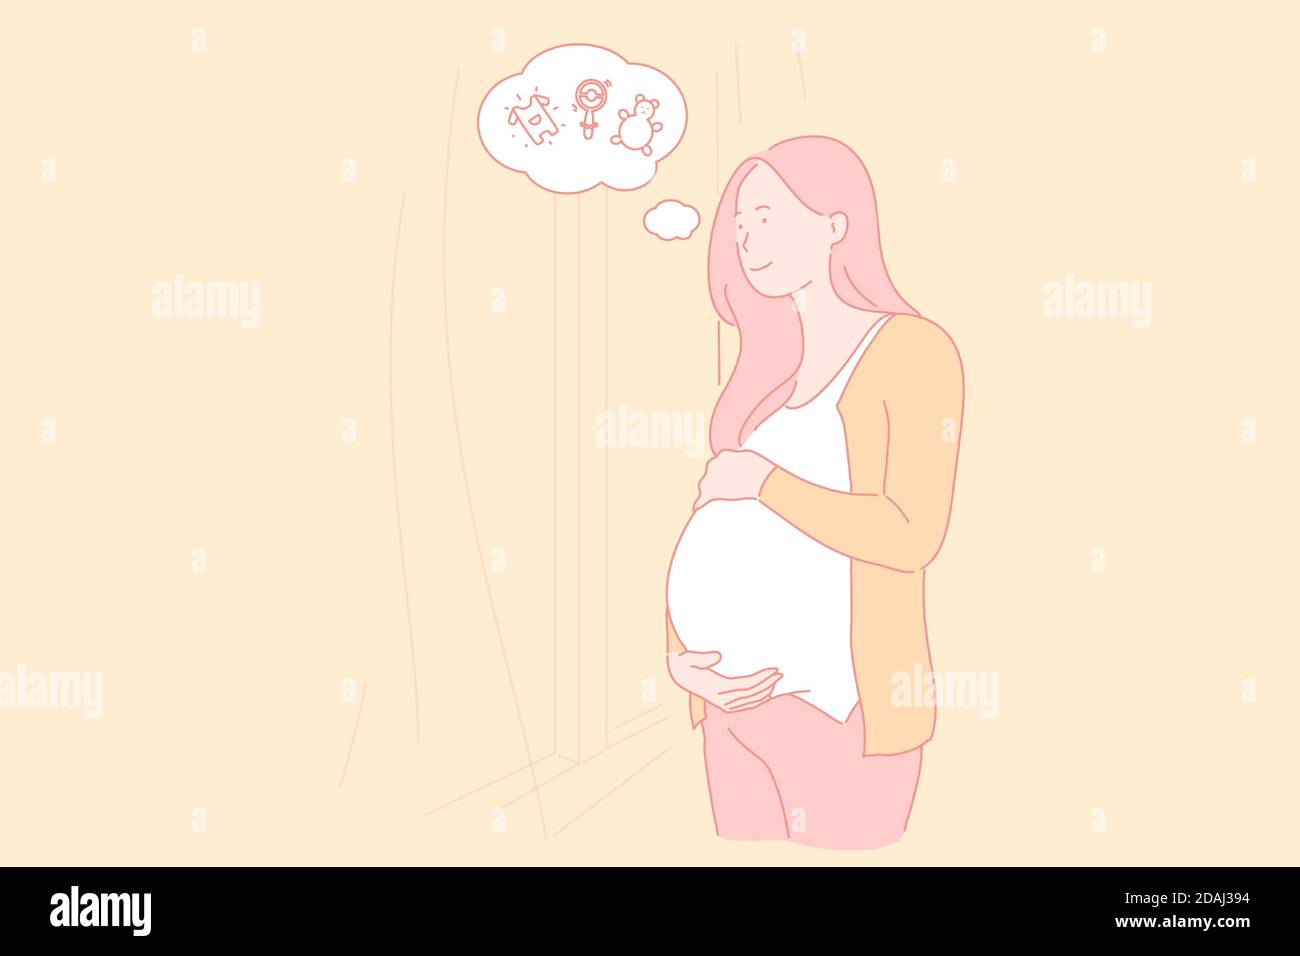 Pregnancy, childbearing, female body condition, expecting baby concept Stock Vector